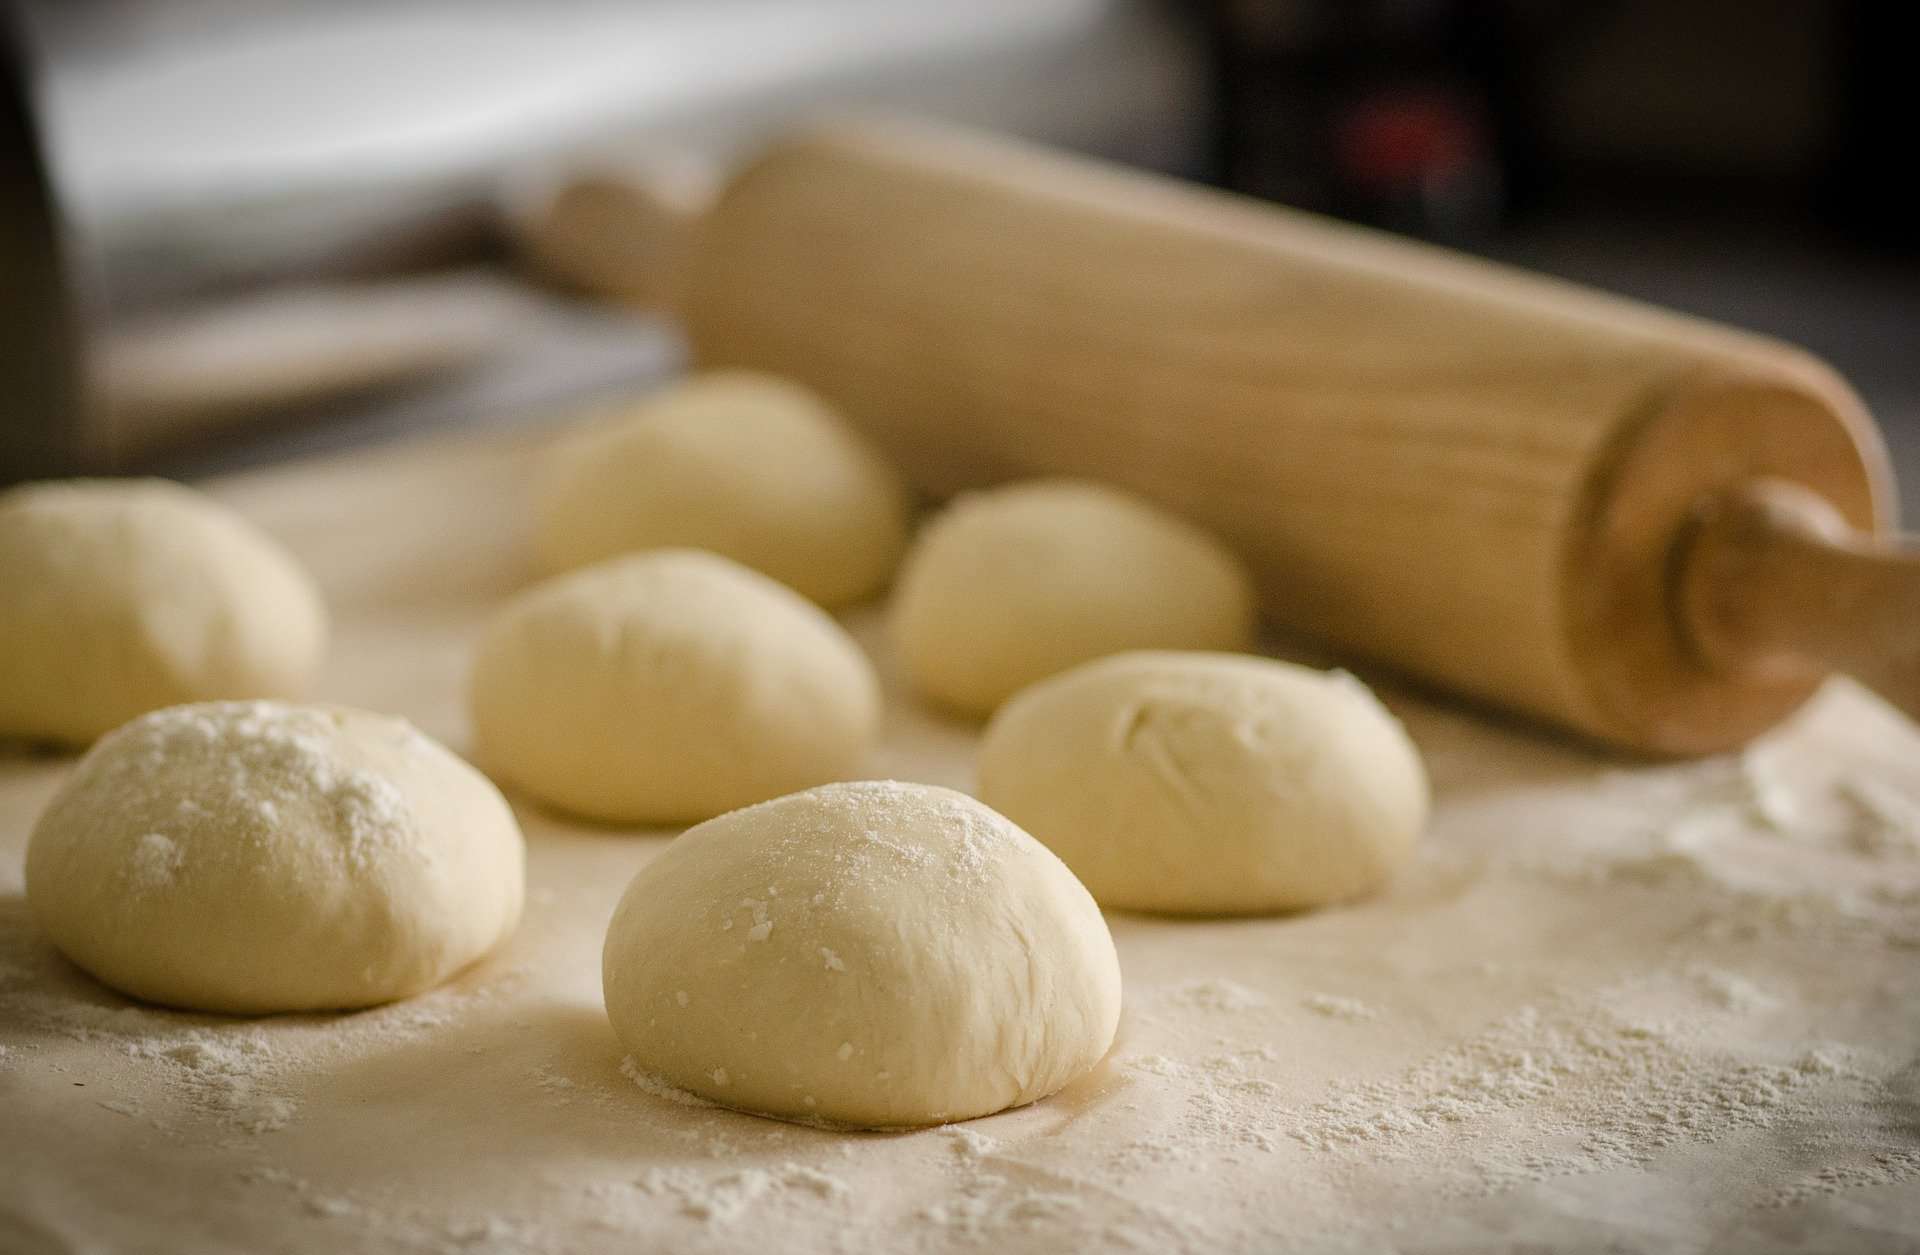 Pizza dough preparation with roller